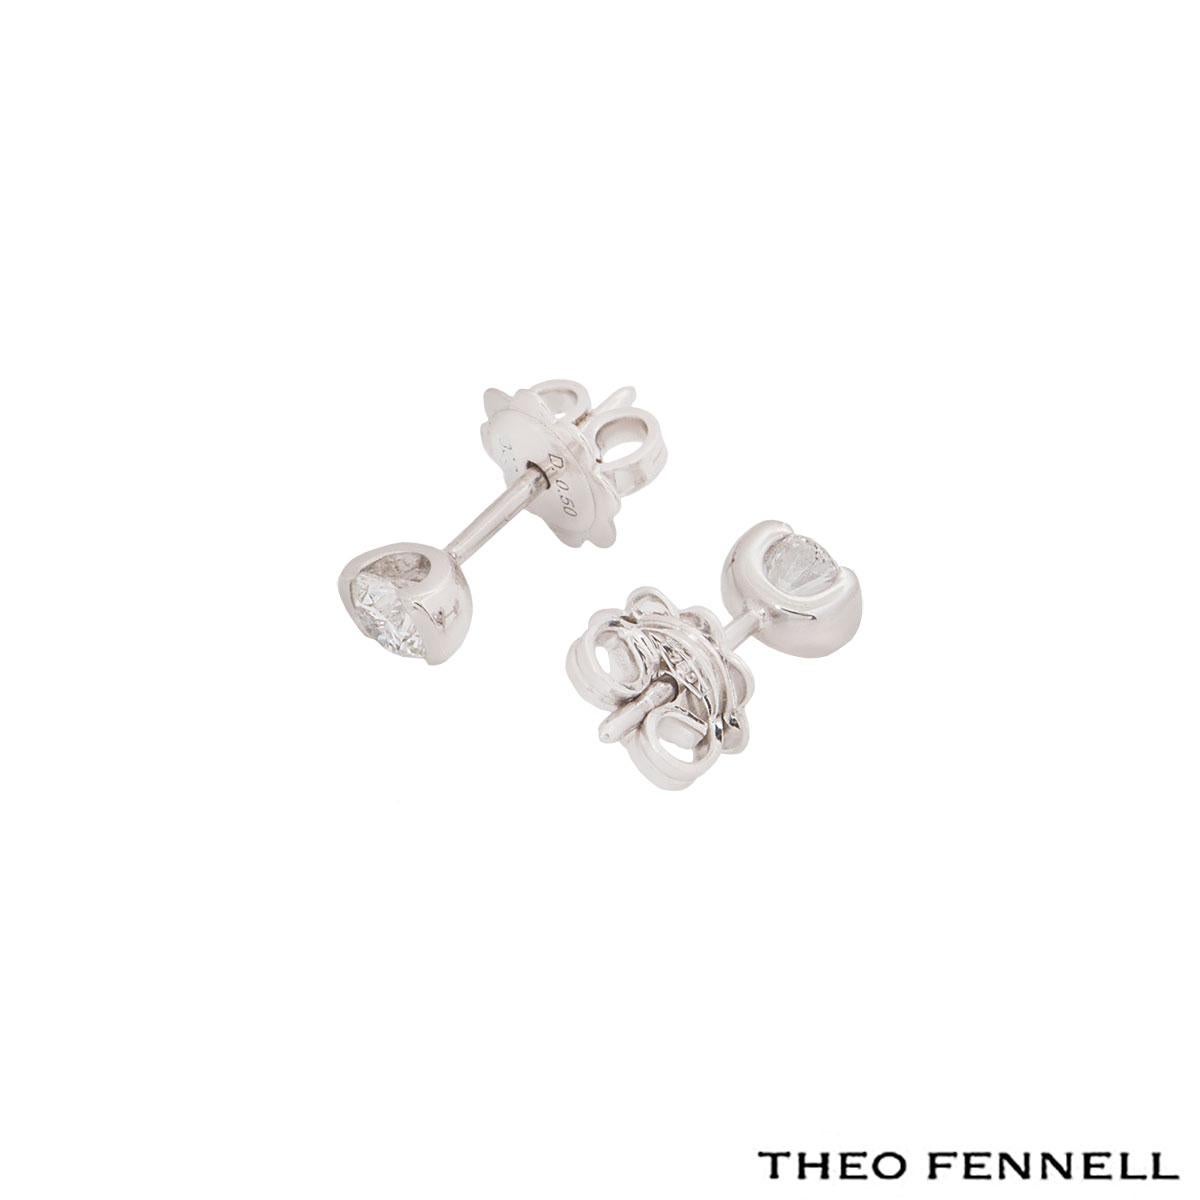 A beautiful pair of 18k white gold diamond stud earrings by Theo Fennell. The earrings comprise of a single round brilliant cut diamond in a half rubover setting with a total weight of 0.50ct, G colour and VS1. The earrings have a length of 1.30cm